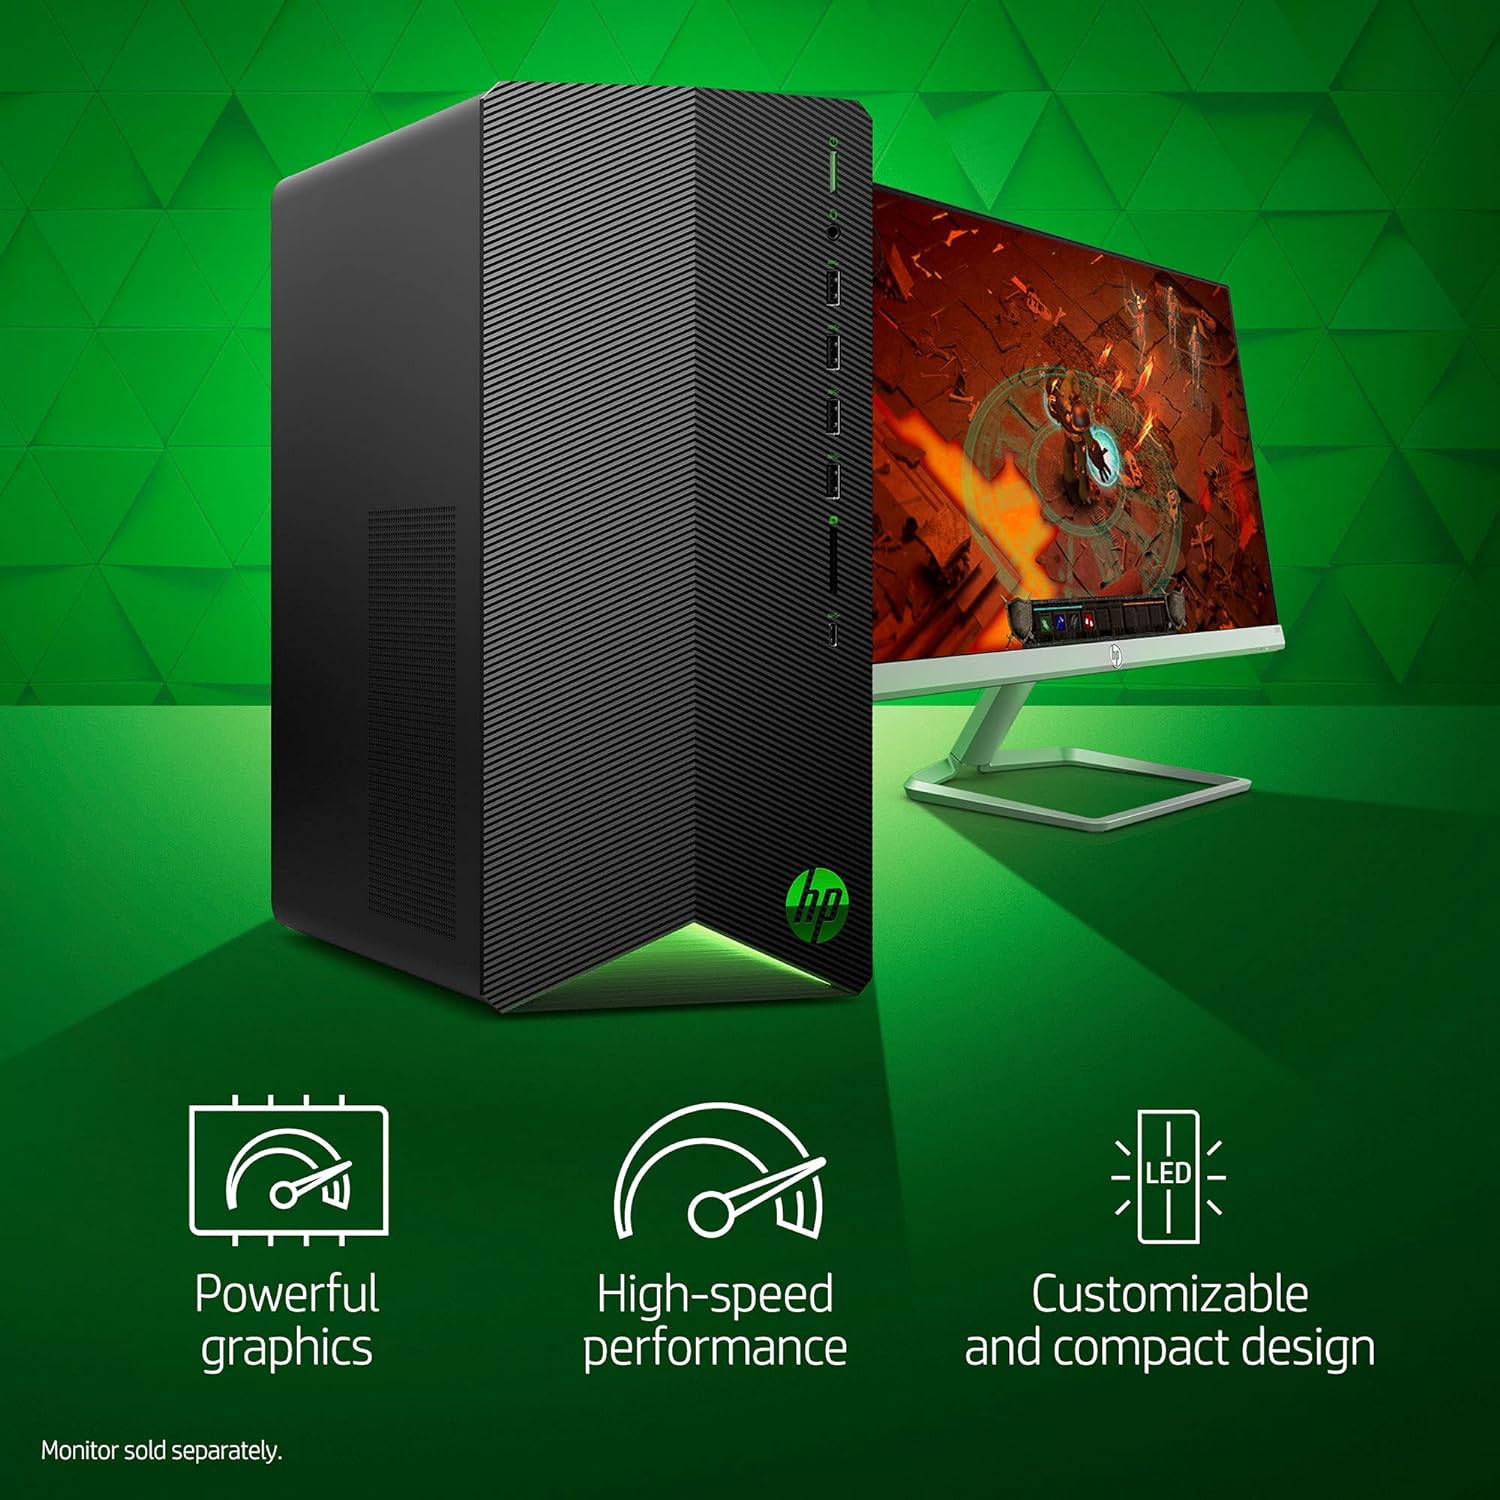 HP 2021 Newest Pavilion Gaming Desktop Computer, AMD 6-Core Ryzen 5600G Processor (Up to 4.4 GHz), AMD Radeon RX 5500, 32GB RAM,1TB PCIe NVMe SSD, Mouse and Keyboard, Win 10 Home + HDMI Cable